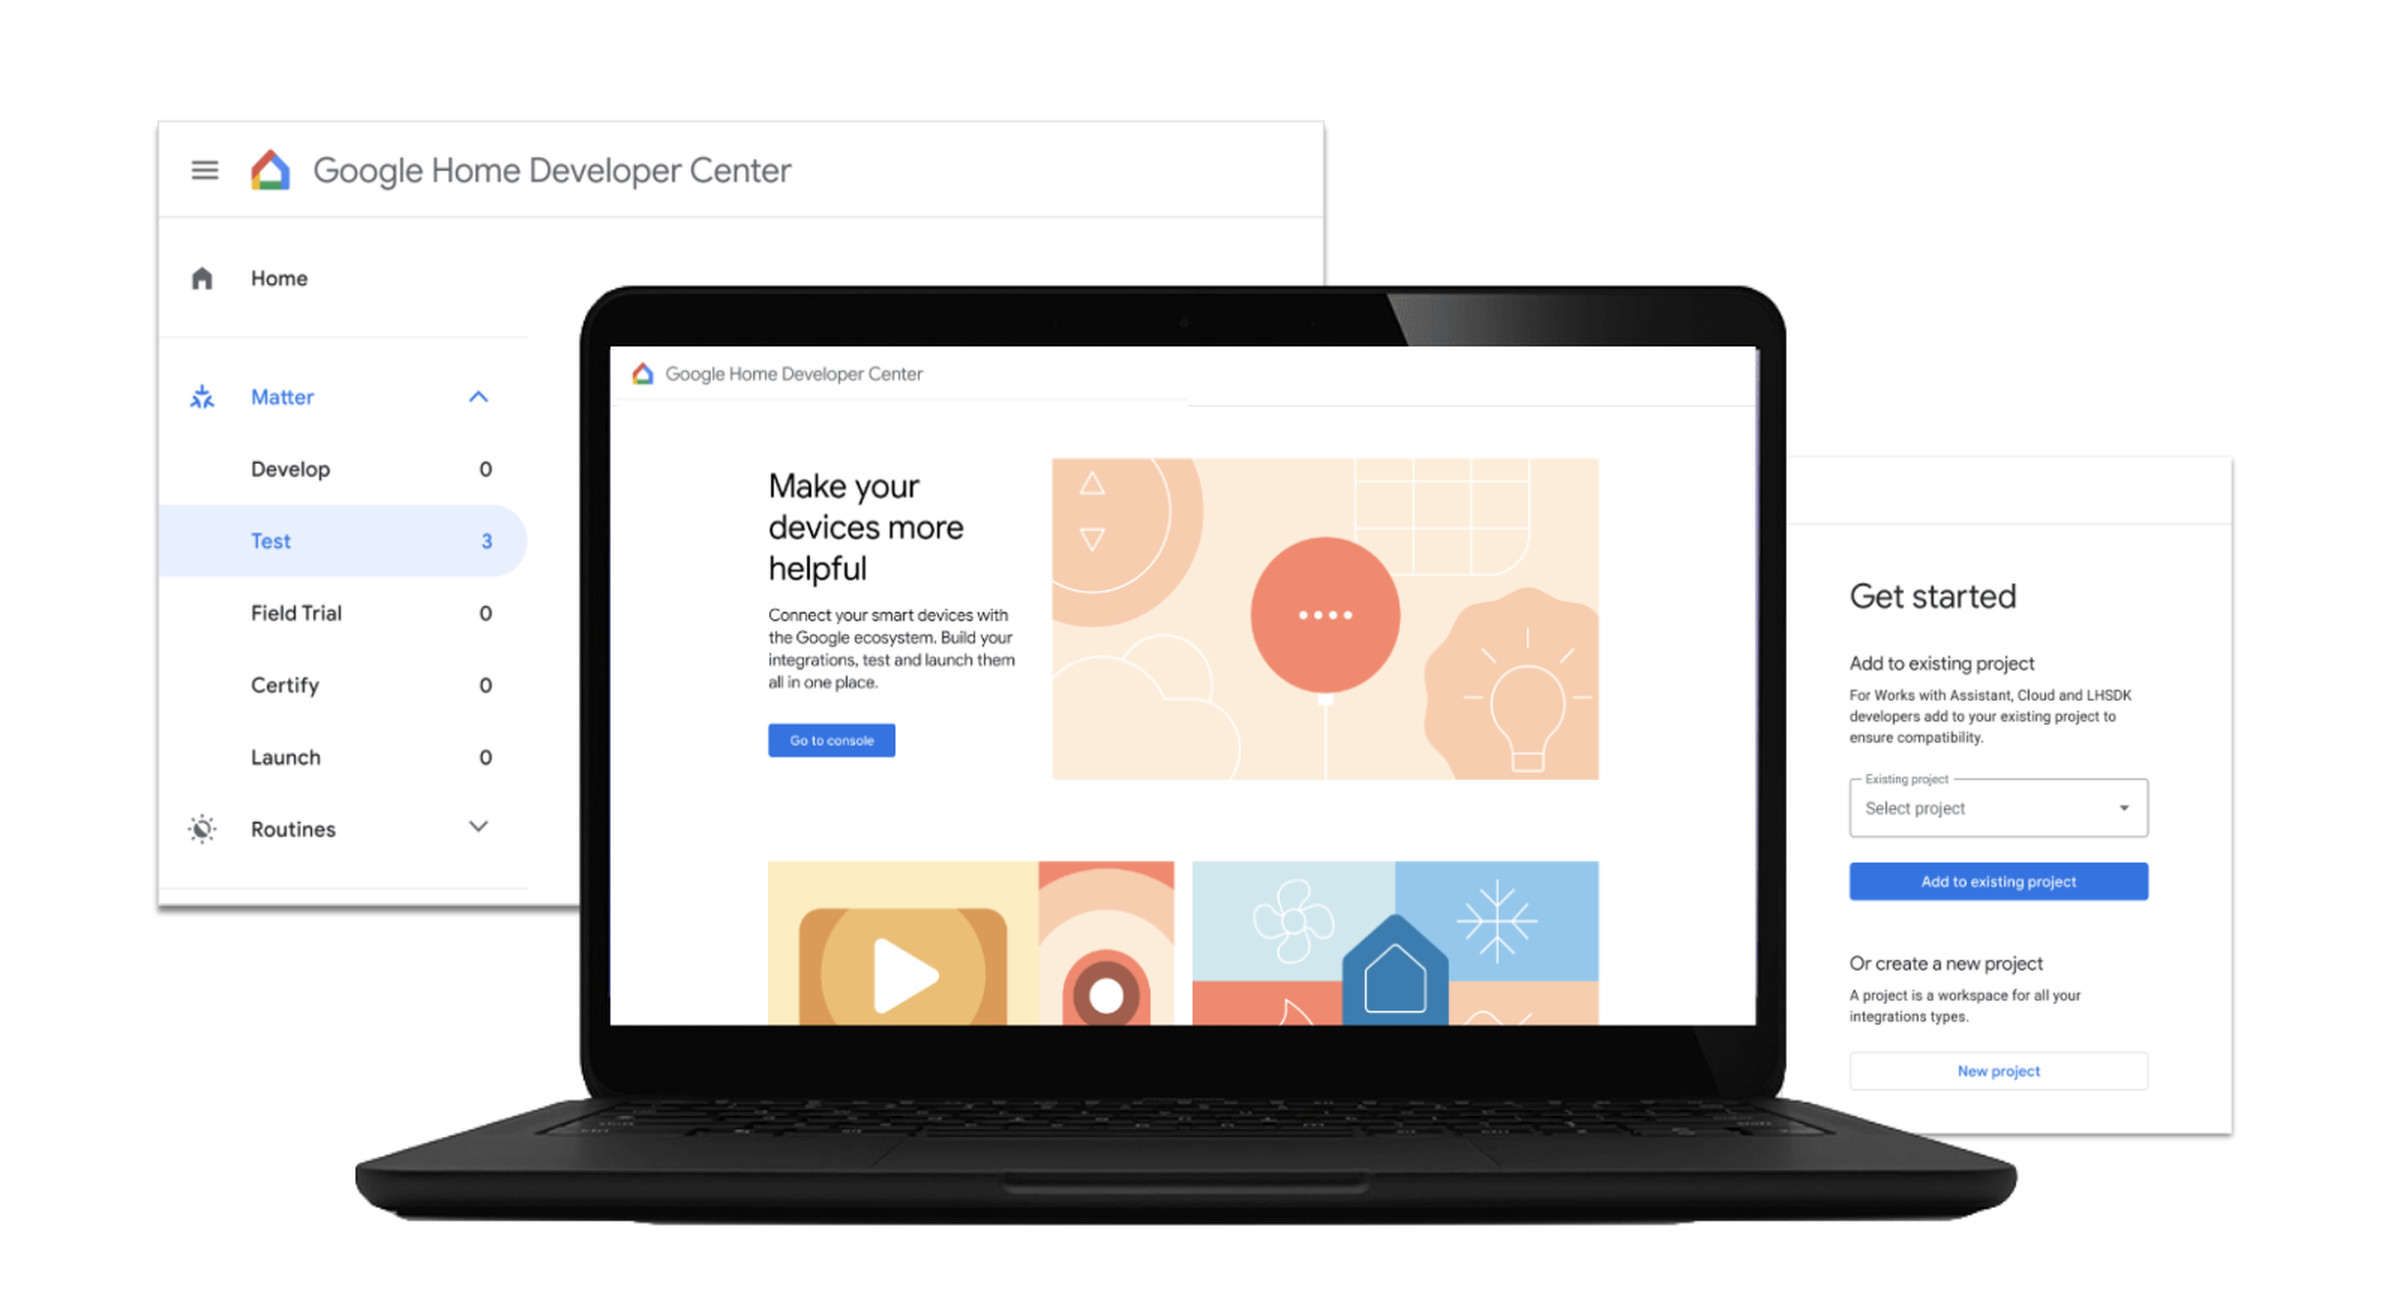 The Google Home Developer Center launches next year.